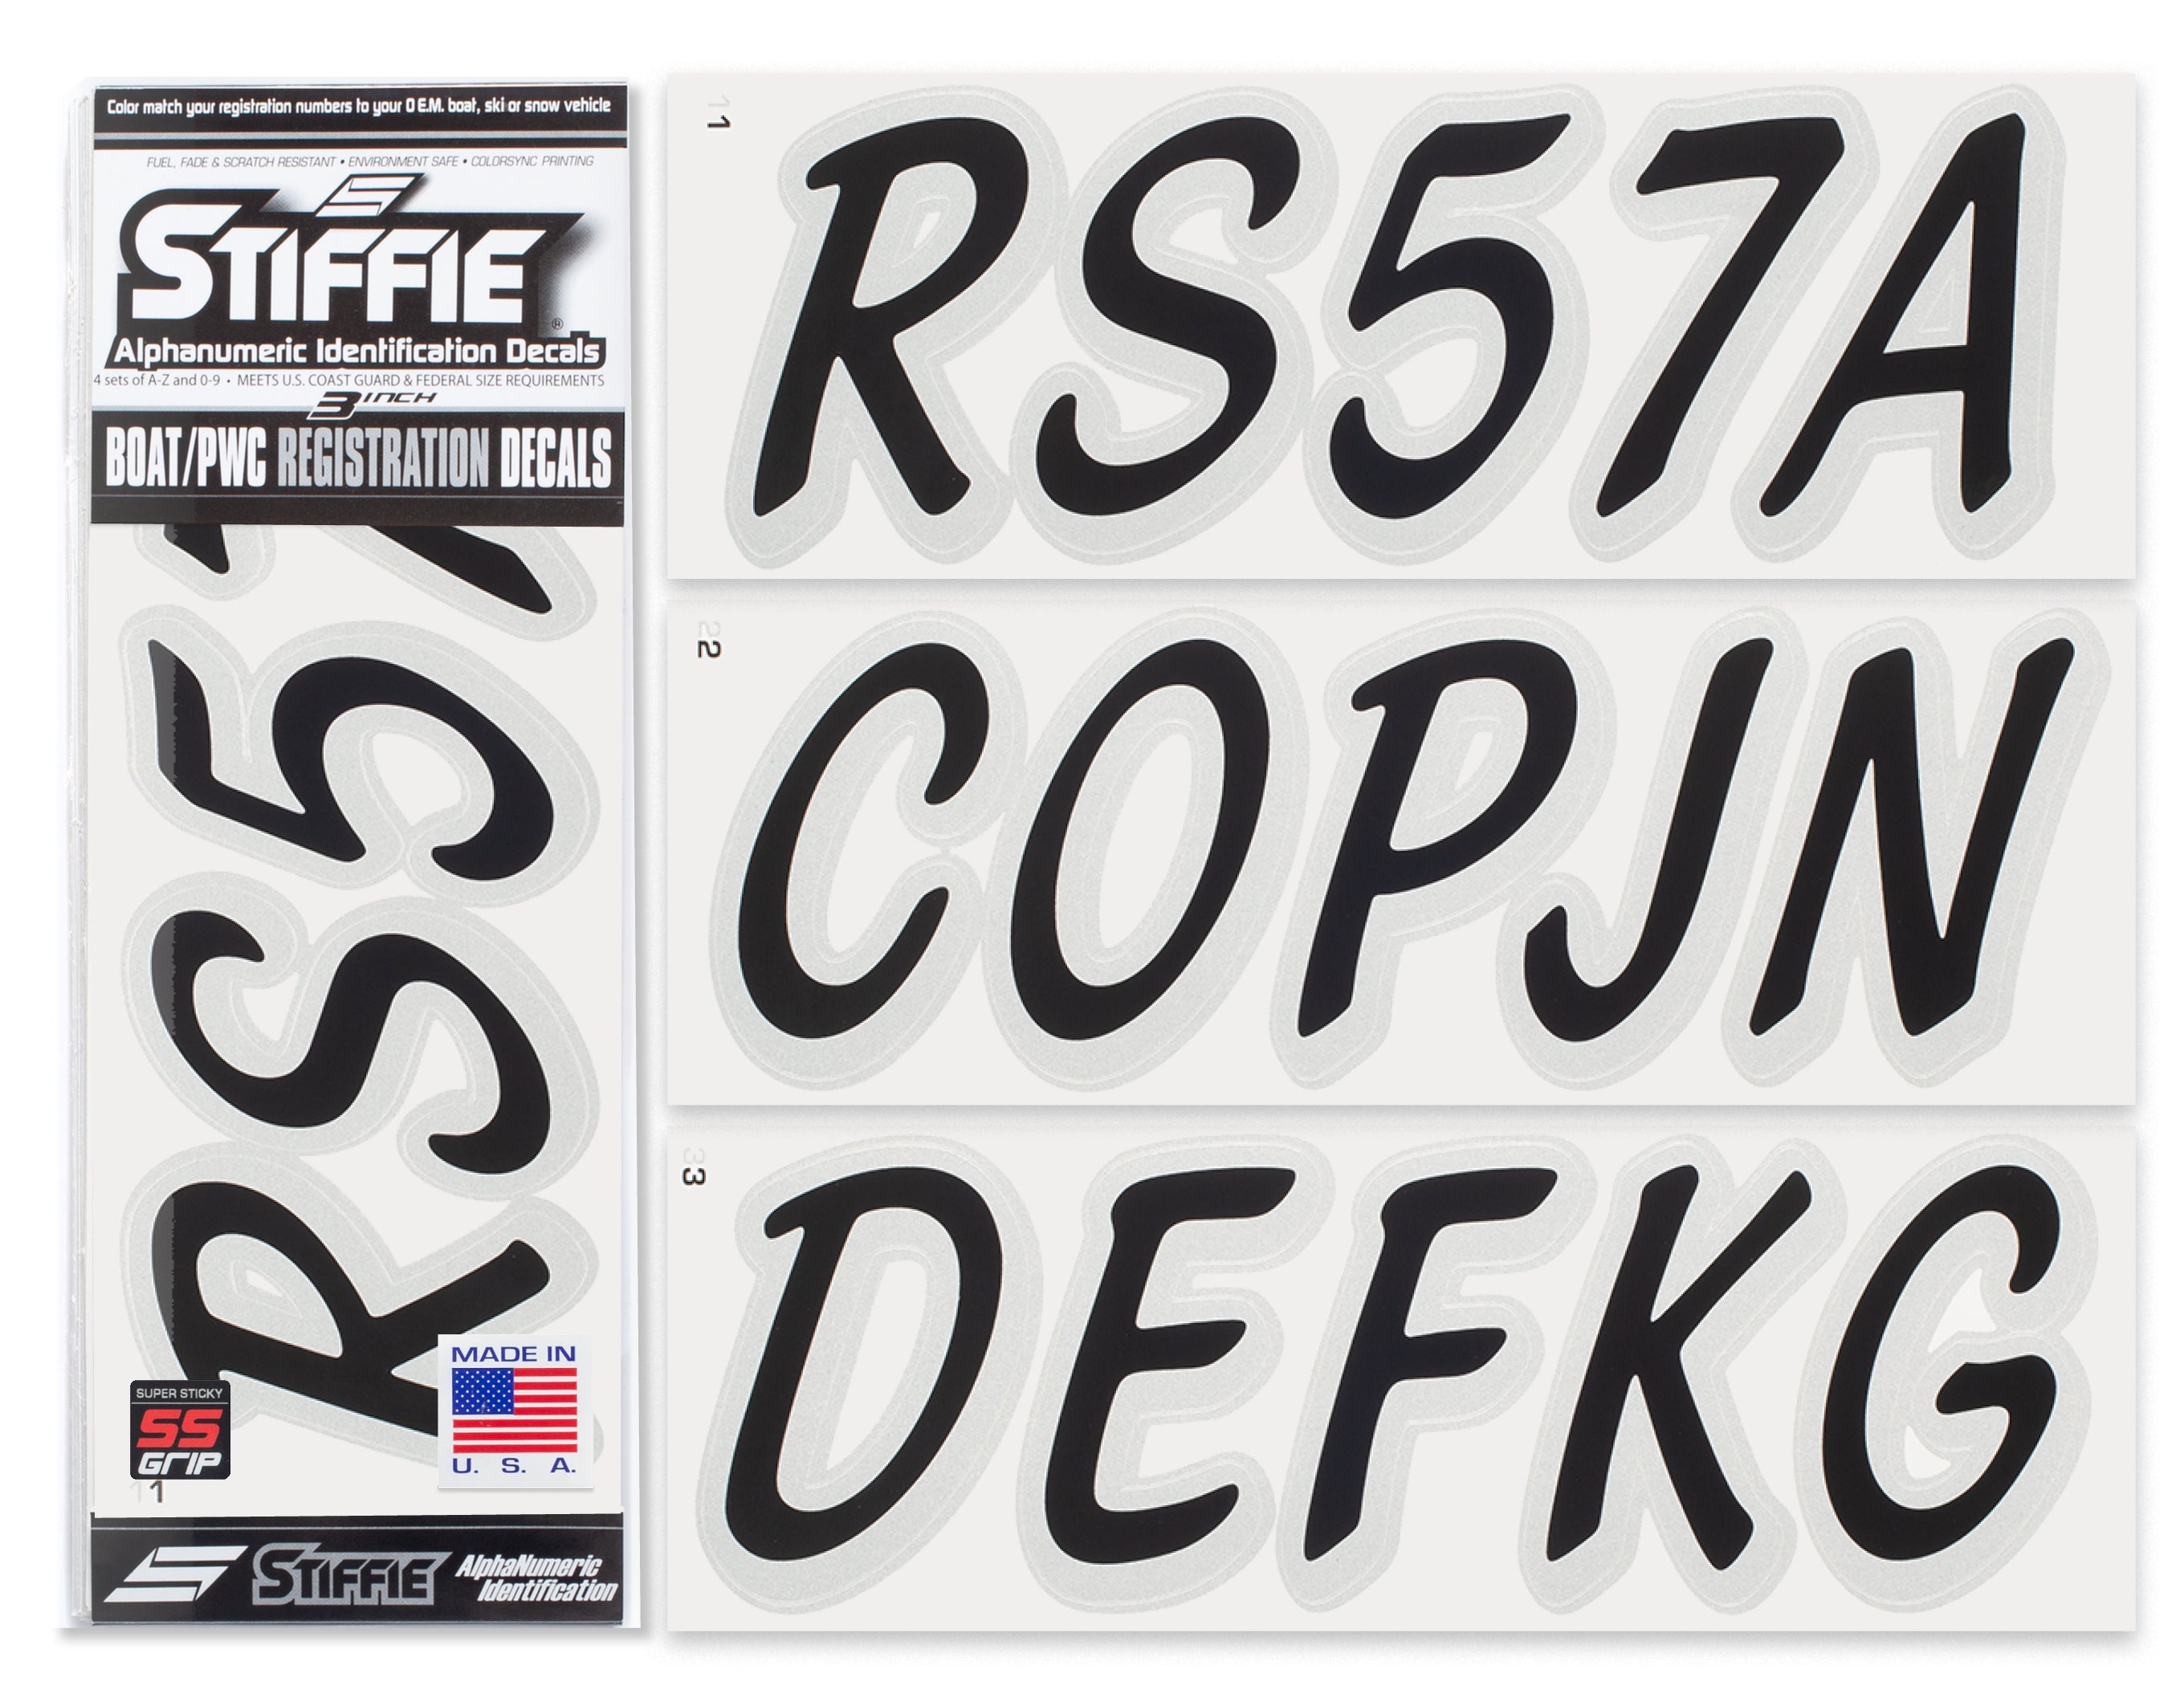 STIFFIE Whipline Solid Black/Metallic Silver Super Sticky 3" Alpha-Numeric Registration Identification Numbers Stickers Decals for Boats & Personal Watercraft